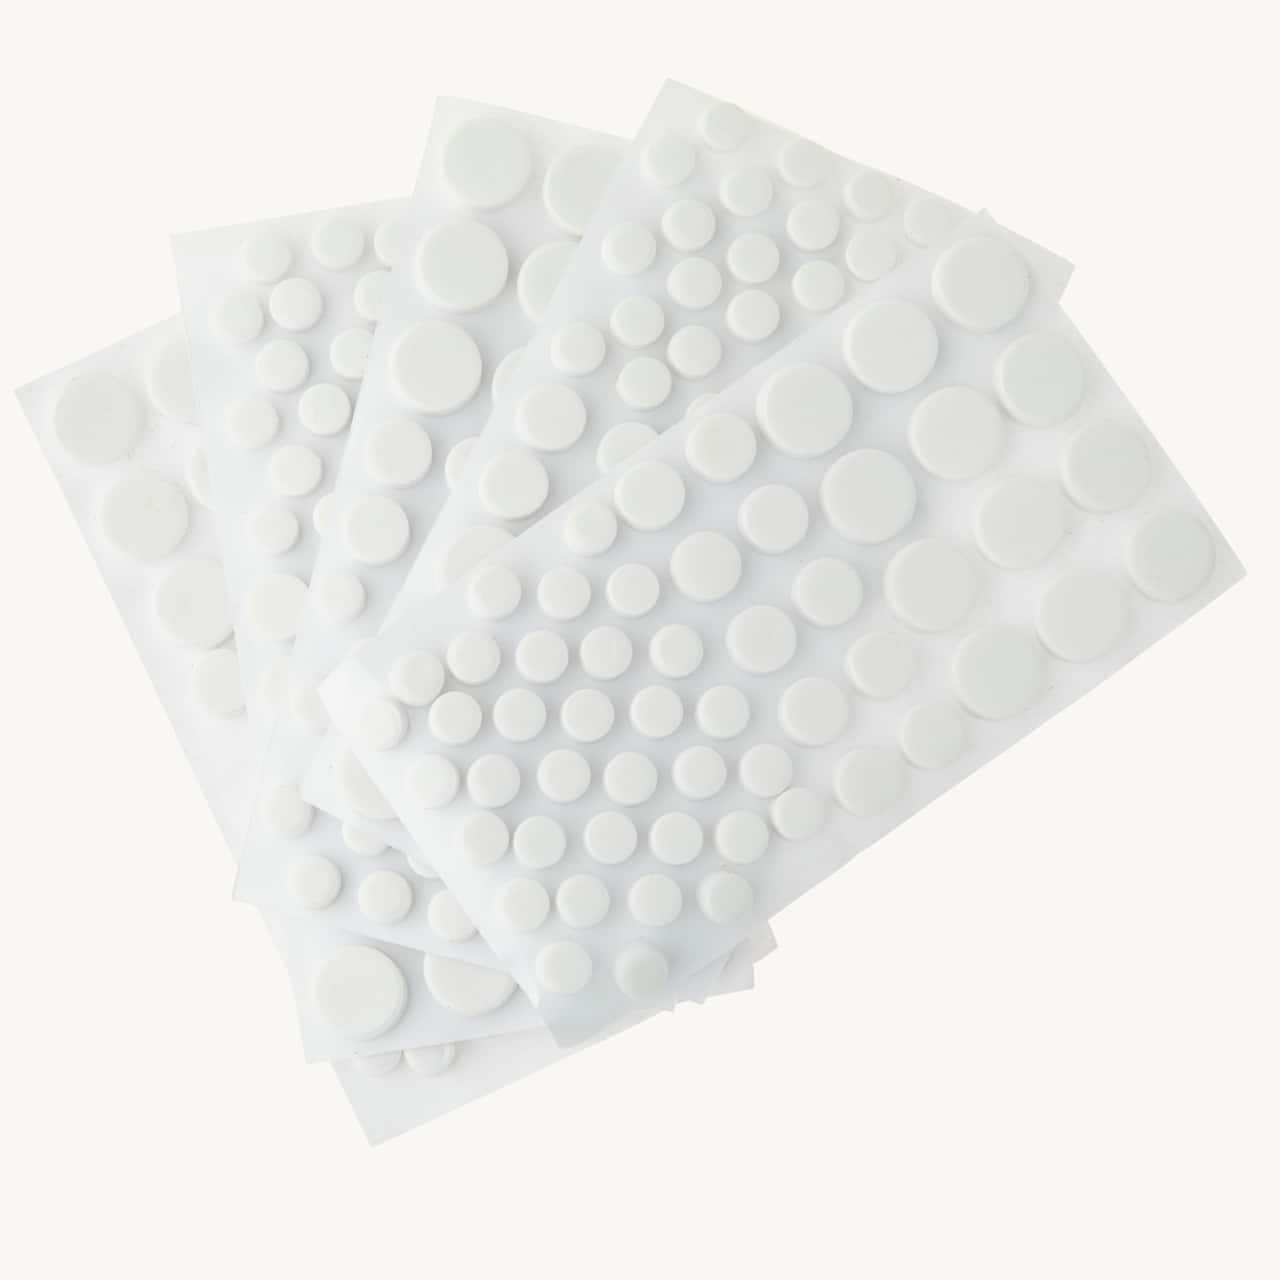 12 Packs: 275 ct. (3300 total) Foam Adhesive Circles by Recollections™